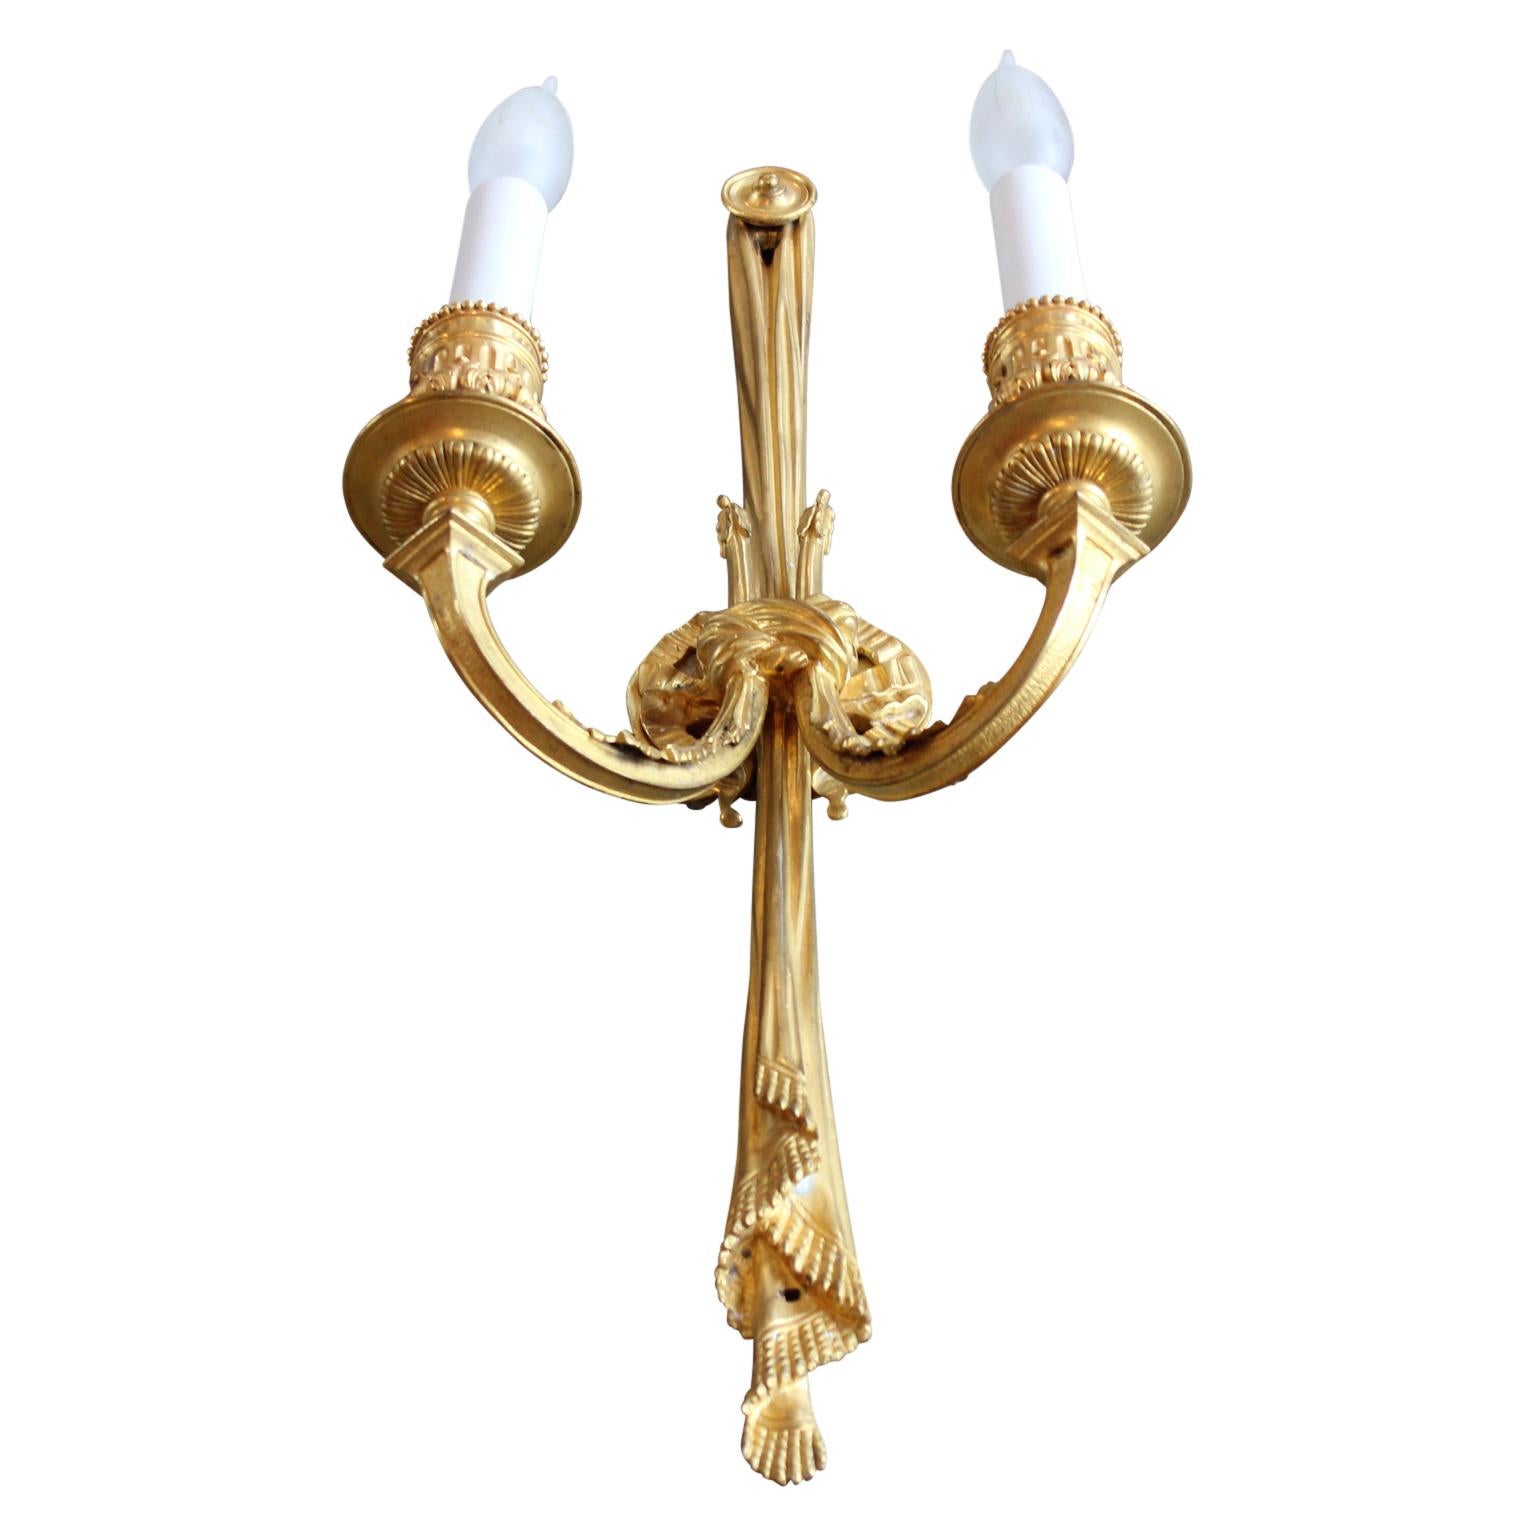 Stunning pair of French gilt wall sconces in the Louis XVI style.